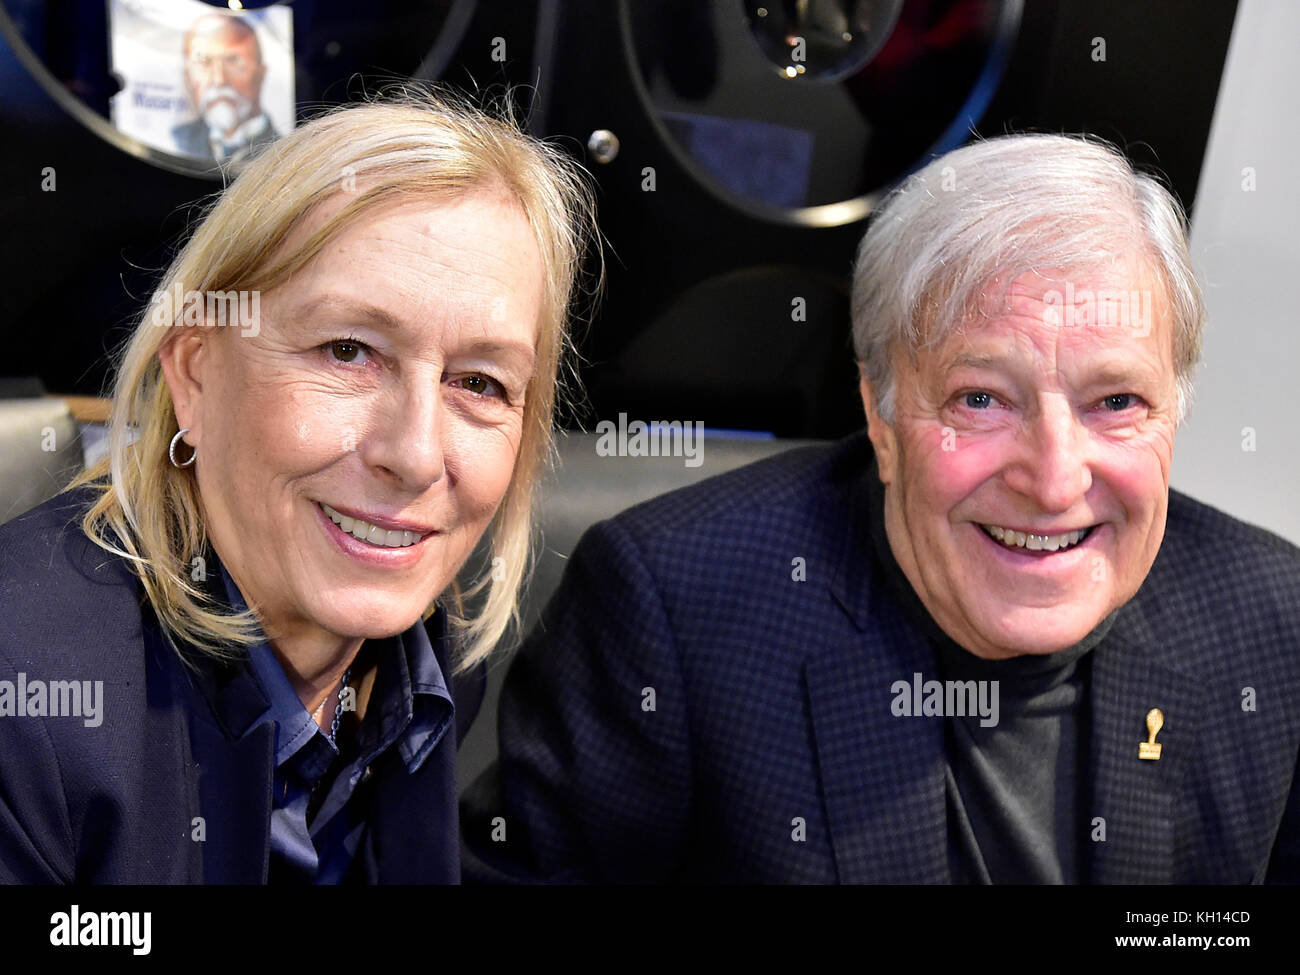 Czech Wimbledon winners Martina Navratilova, left, and Jan Kodes are the first tennis champions to appear on commemorative coins whose gypsum models the Ceska mincovna (Czech Mint) unveiled today, on Monday, November 13, 2017. The mint itself will take place in Jablonec nad Nisou, north Bohemia, in early 2018'. One can perhaps dream of being on a postage stamp, but being on a coin is truly special,' Navratilova said. Navratilova, a U.S. citizen, is a nine-time Wimbledon winner (in 1978-1990). She defected from the Communist Czechoslovakia to the USA in 1975. Kodes won the Wimbledon tournament Stock Photo